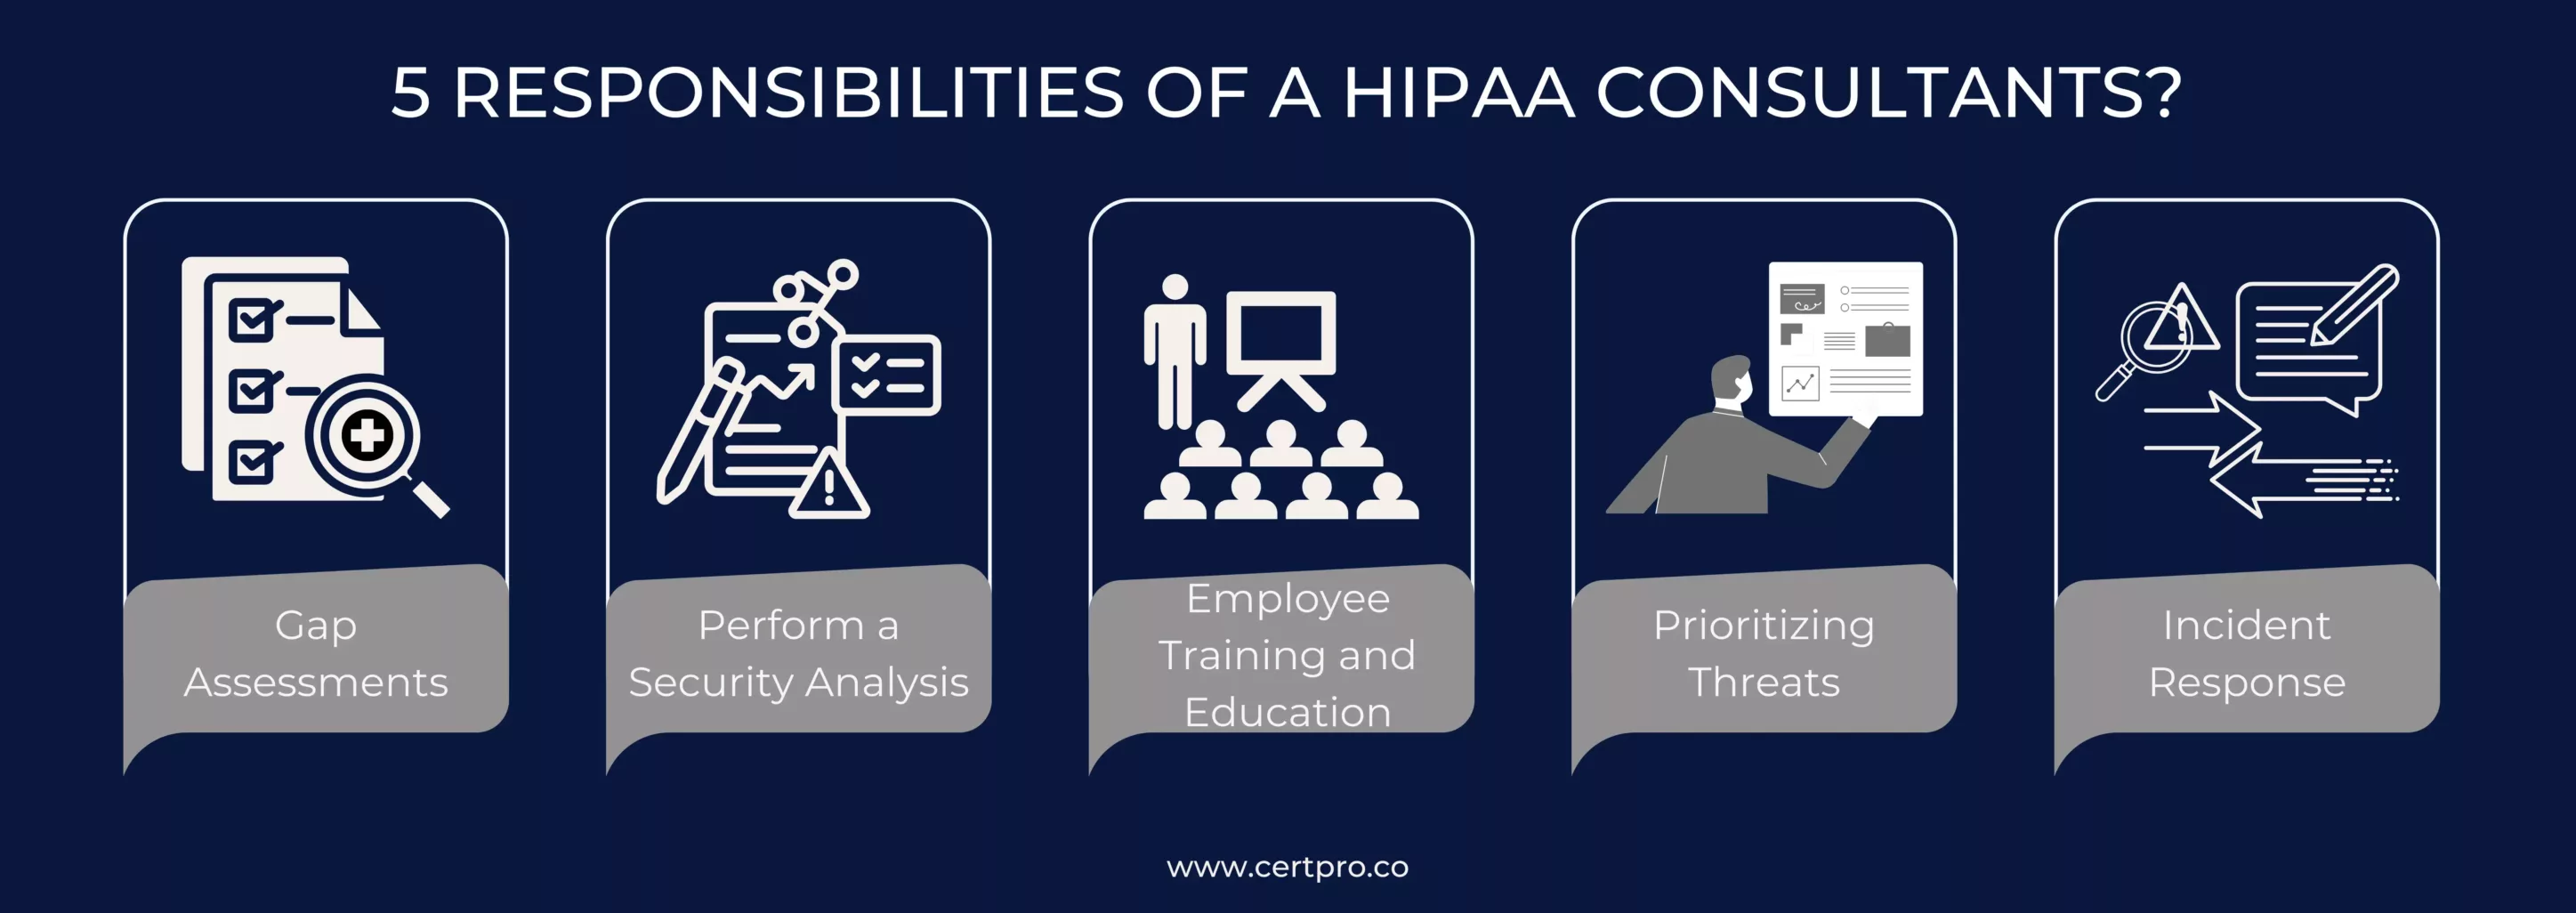 5 RESPONSIBILITIES OF A HIPAA CONSULTANTS